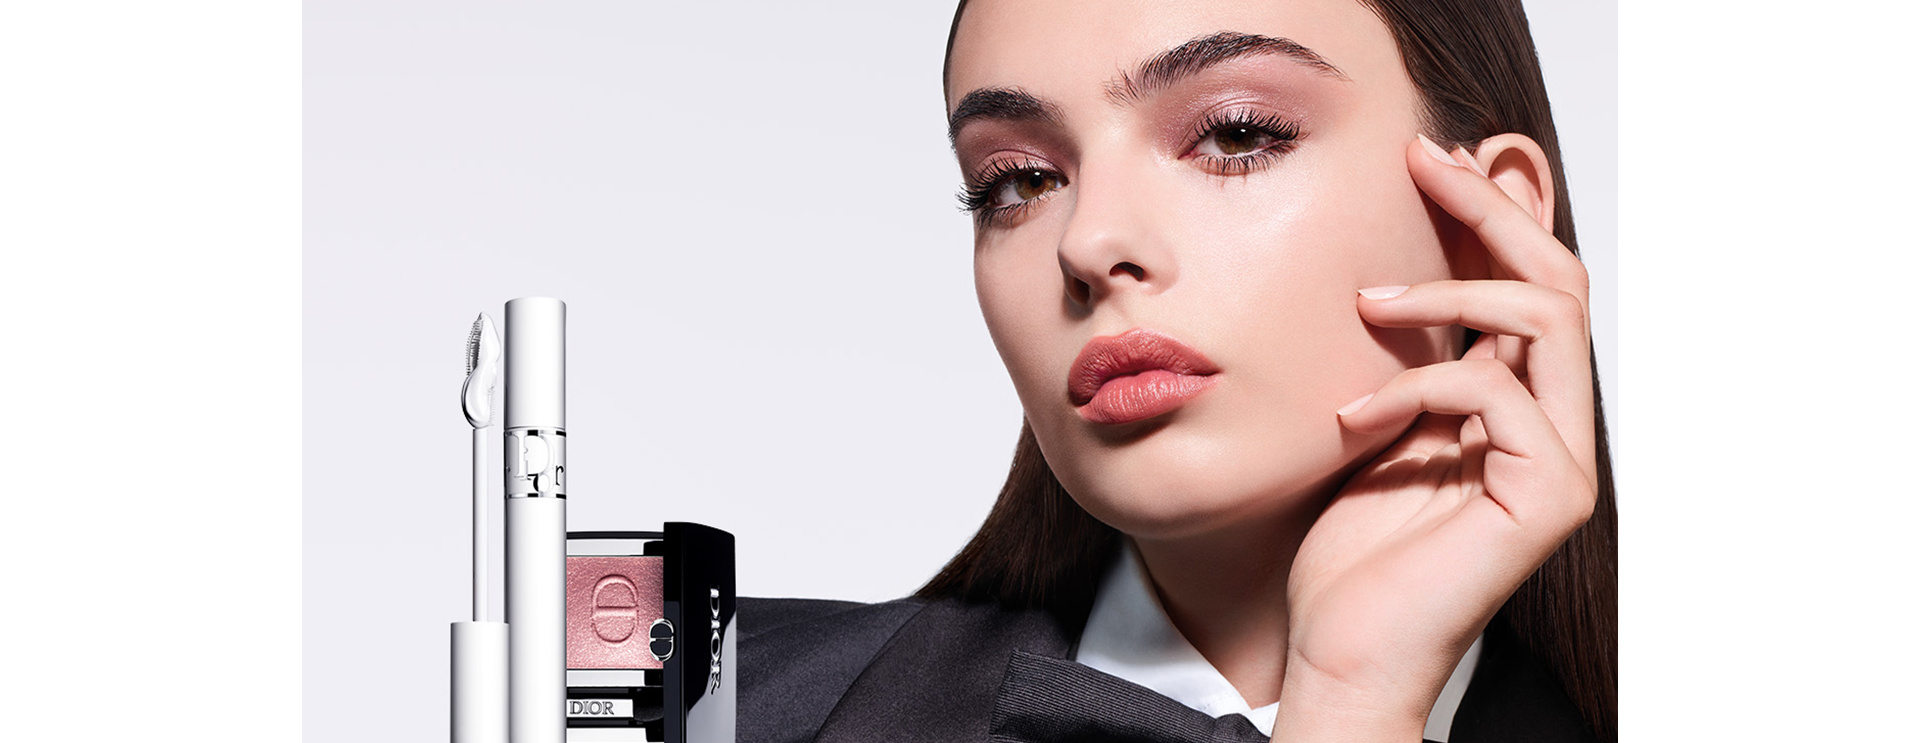 Diorshow - Style your eyes in Dior